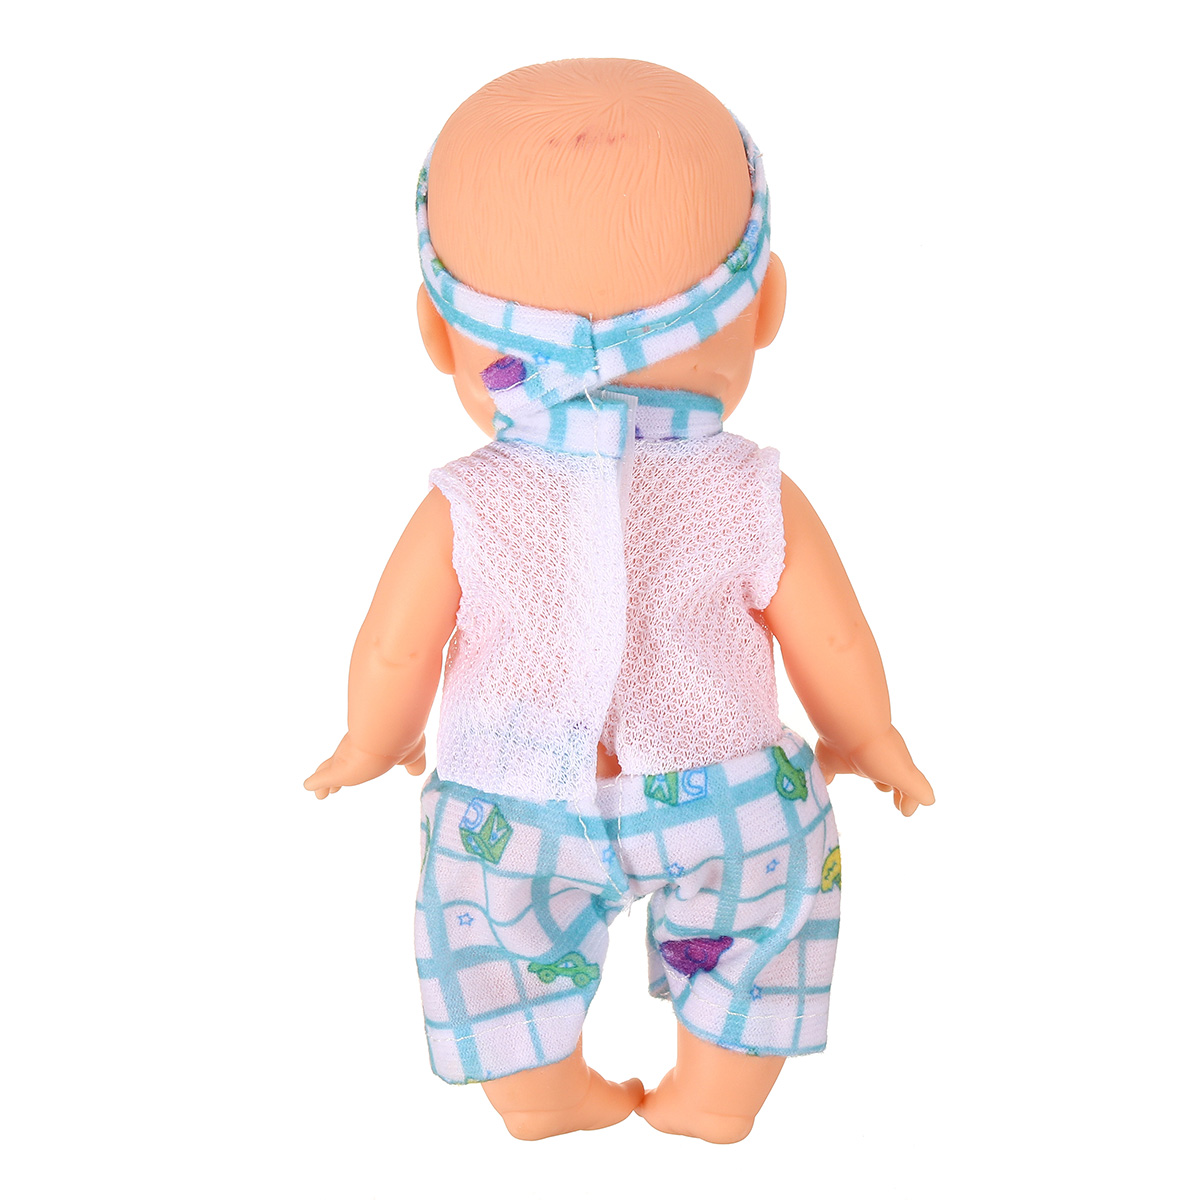 Simulation-Baby-3D-Creative-Cute-Doll-Play-House-Toy-Doll-Vinyl-Doll-Gift-1818656-22